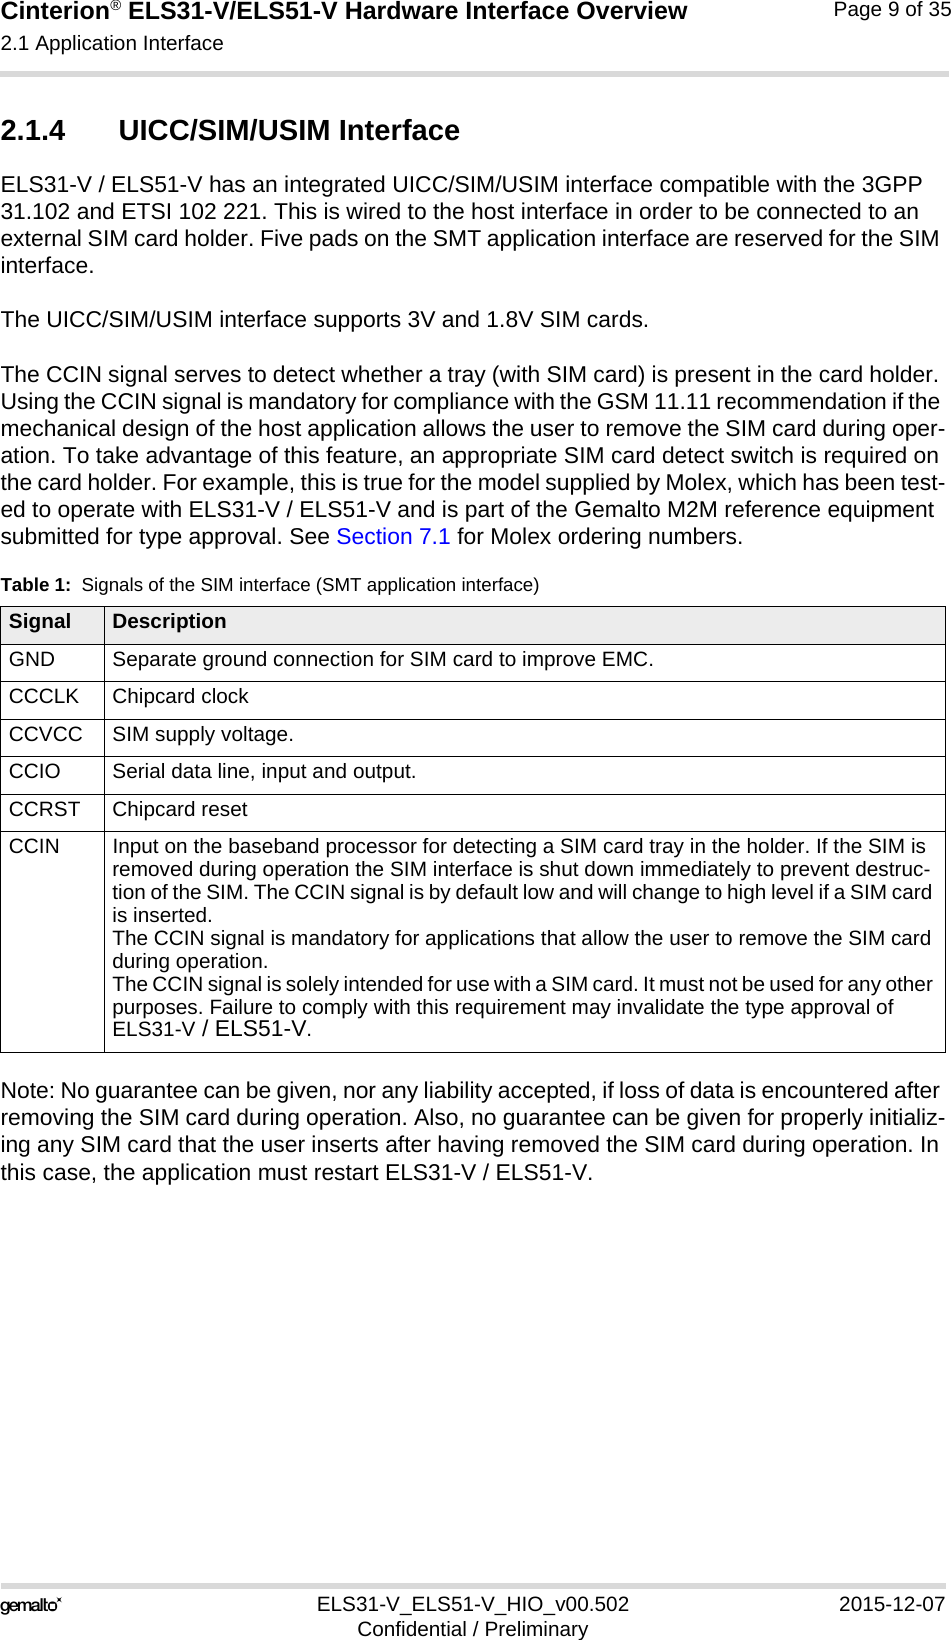 Cinterion® ELS31-V/ELS51-V Hardware Interface Overview2.1 Application Interface17ELS31-V_ELS51-V_HIO_v00.502 2015-12-07Confidential / PreliminaryPage 9 of 352.1.4 UICC/SIM/USIM InterfaceELS31-V / ELS51-V has an integrated UICC/SIM/USIM interface compatible with the 3GPP 31.102 and ETSI 102 221. This is wired to the host interface in order to be connected to an external SIM card holder. Five pads on the SMT application interface are reserved for the SIM interface. The UICC/SIM/USIM interface supports 3V and 1.8V SIM cards. The CCIN signal serves to detect whether a tray (with SIM card) is present in the card holder. Using the CCIN signal is mandatory for compliance with the GSM 11.11 recommendation if the mechanical design of the host application allows the user to remove the SIM card during oper-ation. To take advantage of this feature, an appropriate SIM card detect switch is required on the card holder. For example, this is true for the model supplied by Molex, which has been test-ed to operate with ELS31-V / ELS51-V and is part of the Gemalto M2M reference equipment submitted for type approval. See Section 7.1 for Molex ordering numbers.Note: No guarantee can be given, nor any liability accepted, if loss of data is encountered after removing the SIM card during operation. Also, no guarantee can be given for properly initializ-ing any SIM card that the user inserts after having removed the SIM card during operation. In this case, the application must restart ELS31-V / ELS51-V.Table 1:  Signals of the SIM interface (SMT application interface)Signal DescriptionGND Separate ground connection for SIM card to improve EMC.CCCLK Chipcard clockCCVCC SIM supply voltage.CCIO Serial data line, input and output.CCRST Chipcard resetCCIN Input on the baseband processor for detecting a SIM card tray in the holder. If the SIM is removed during operation the SIM interface is shut down immediately to prevent destruc-tion of the SIM. The CCIN signal is by default low and will change to high level if a SIM card is inserted.The CCIN signal is mandatory for applications that allow the user to remove the SIM card during operation. The CCIN signal is solely intended for use with a SIM card. It must not be used for any other purposes. Failure to comply with this requirement may invalidate the type approval of ELS31-V / ELS51-V.